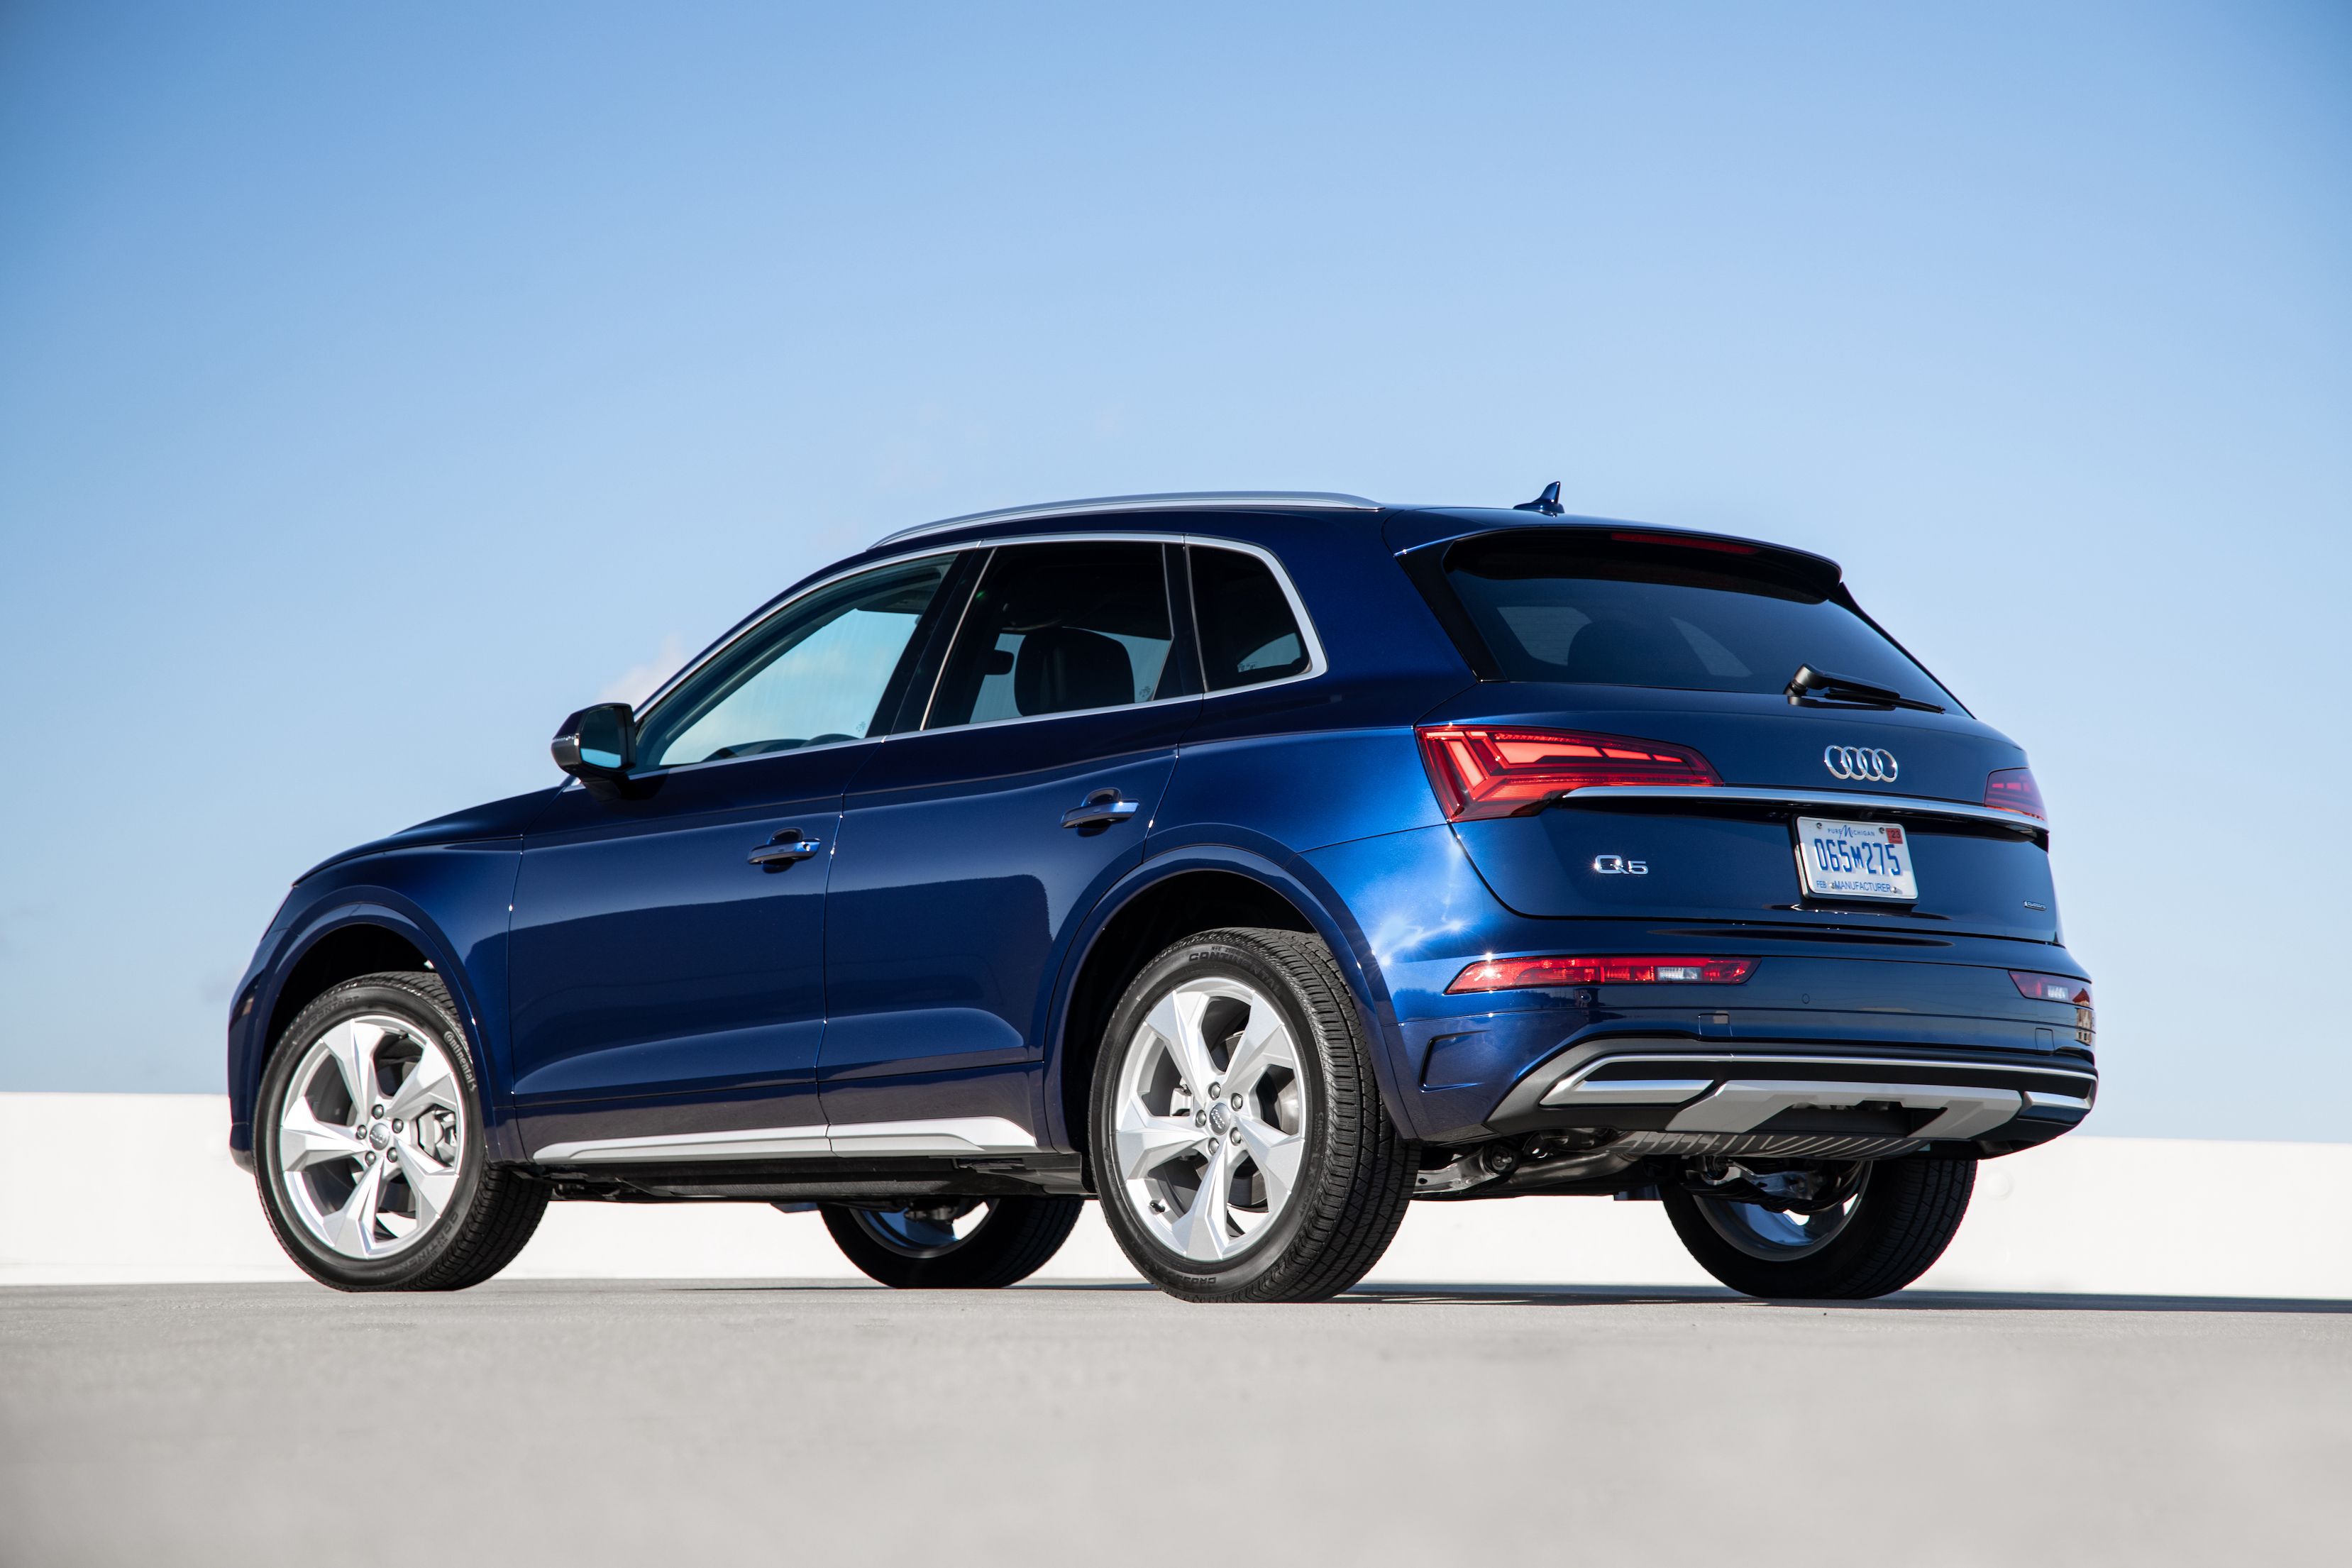 Audi Q5 Review For Sale Colours Interior Specs  News  CarsGuide